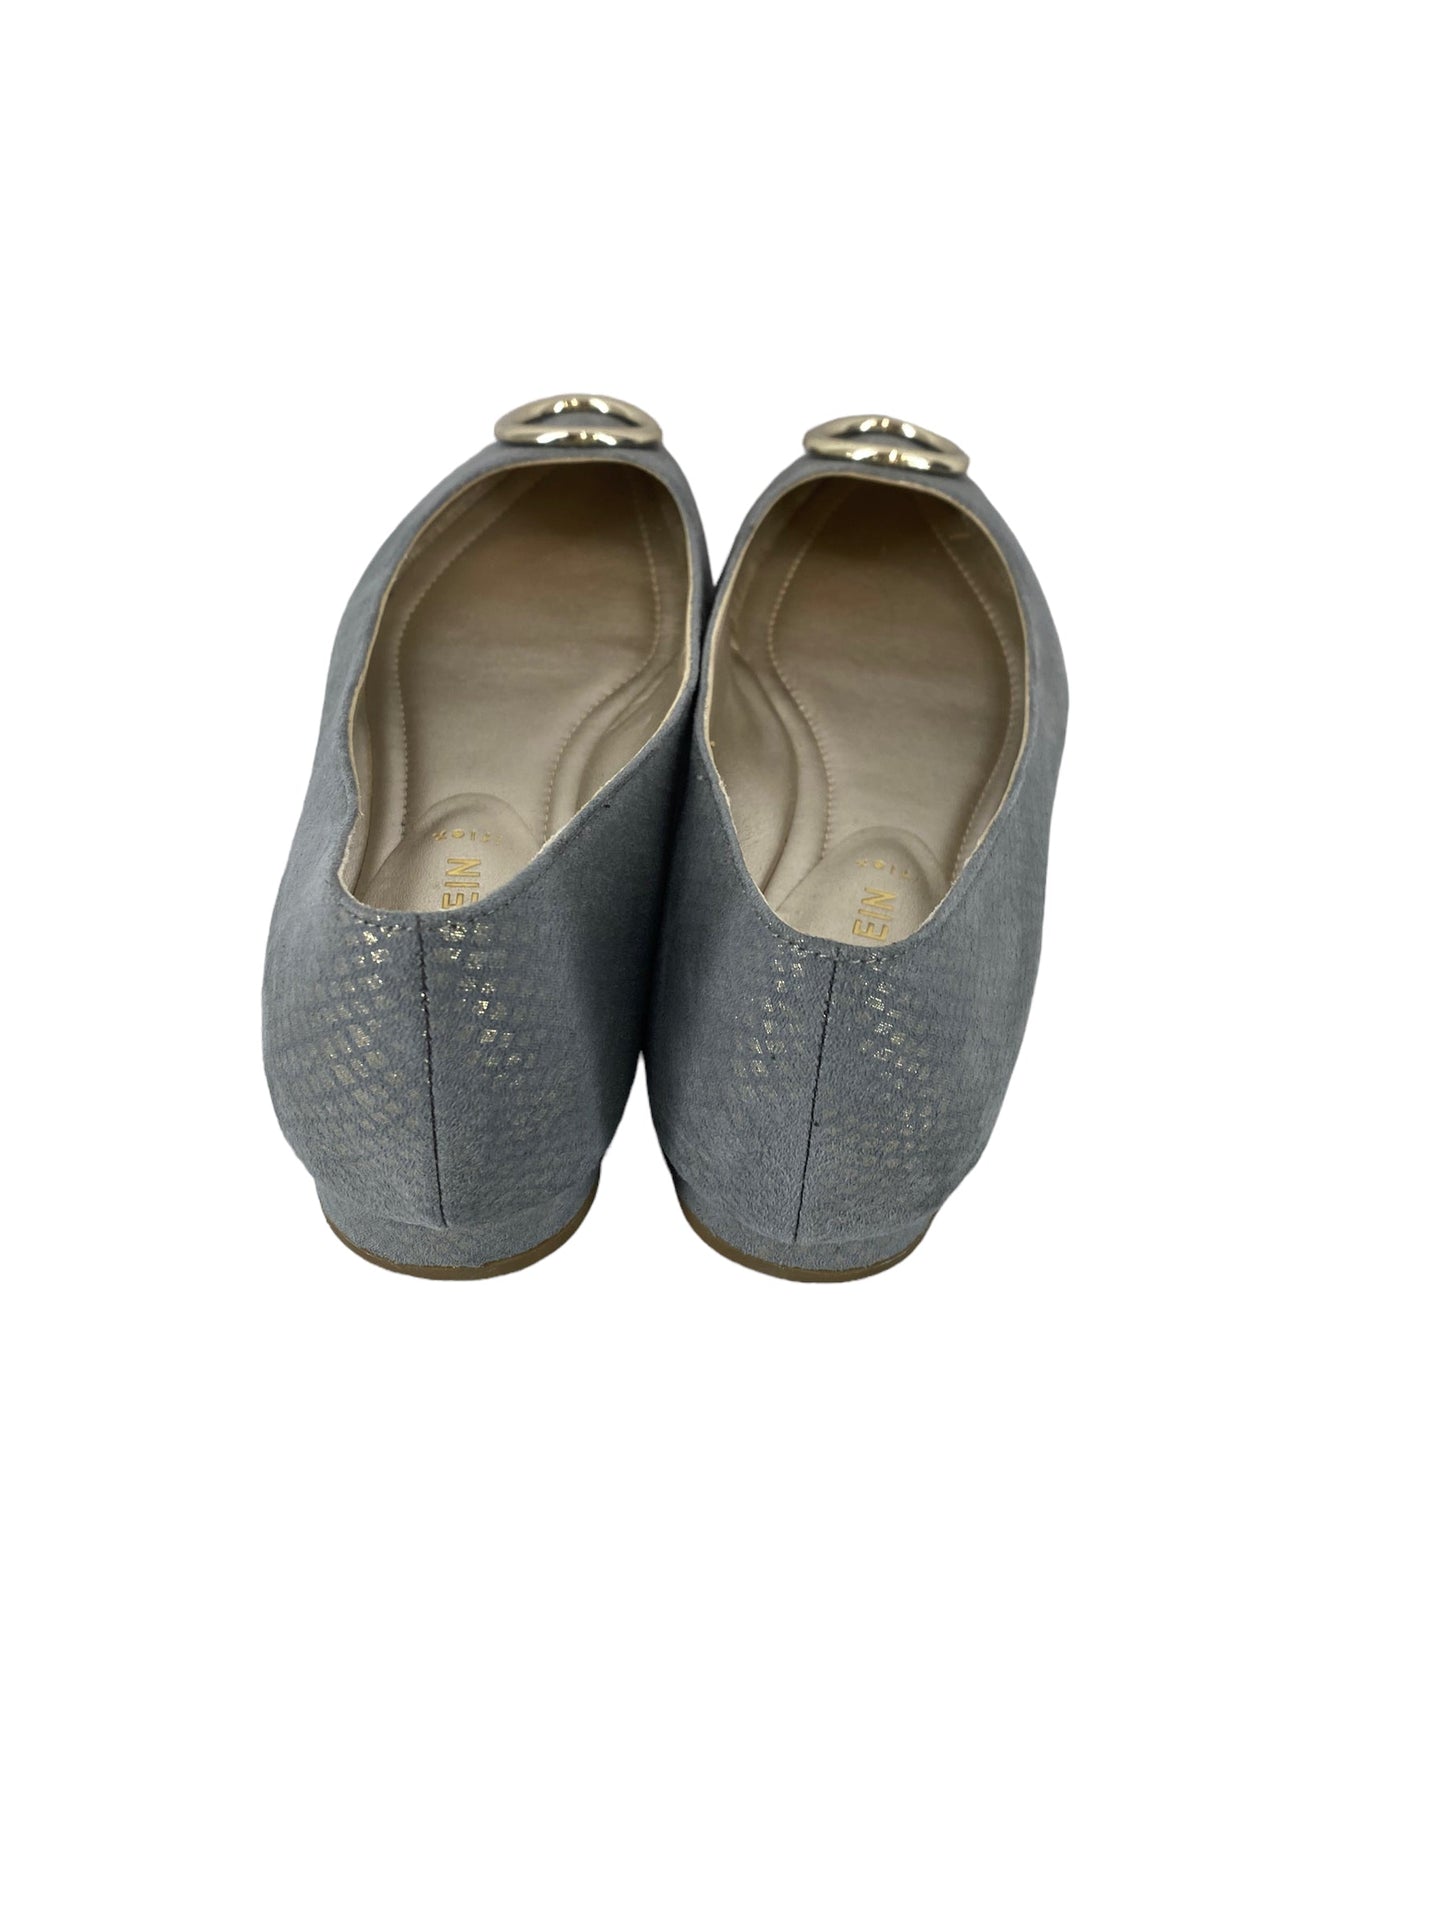 Shoes Flats Other By Anne Klein  Size: 8.5